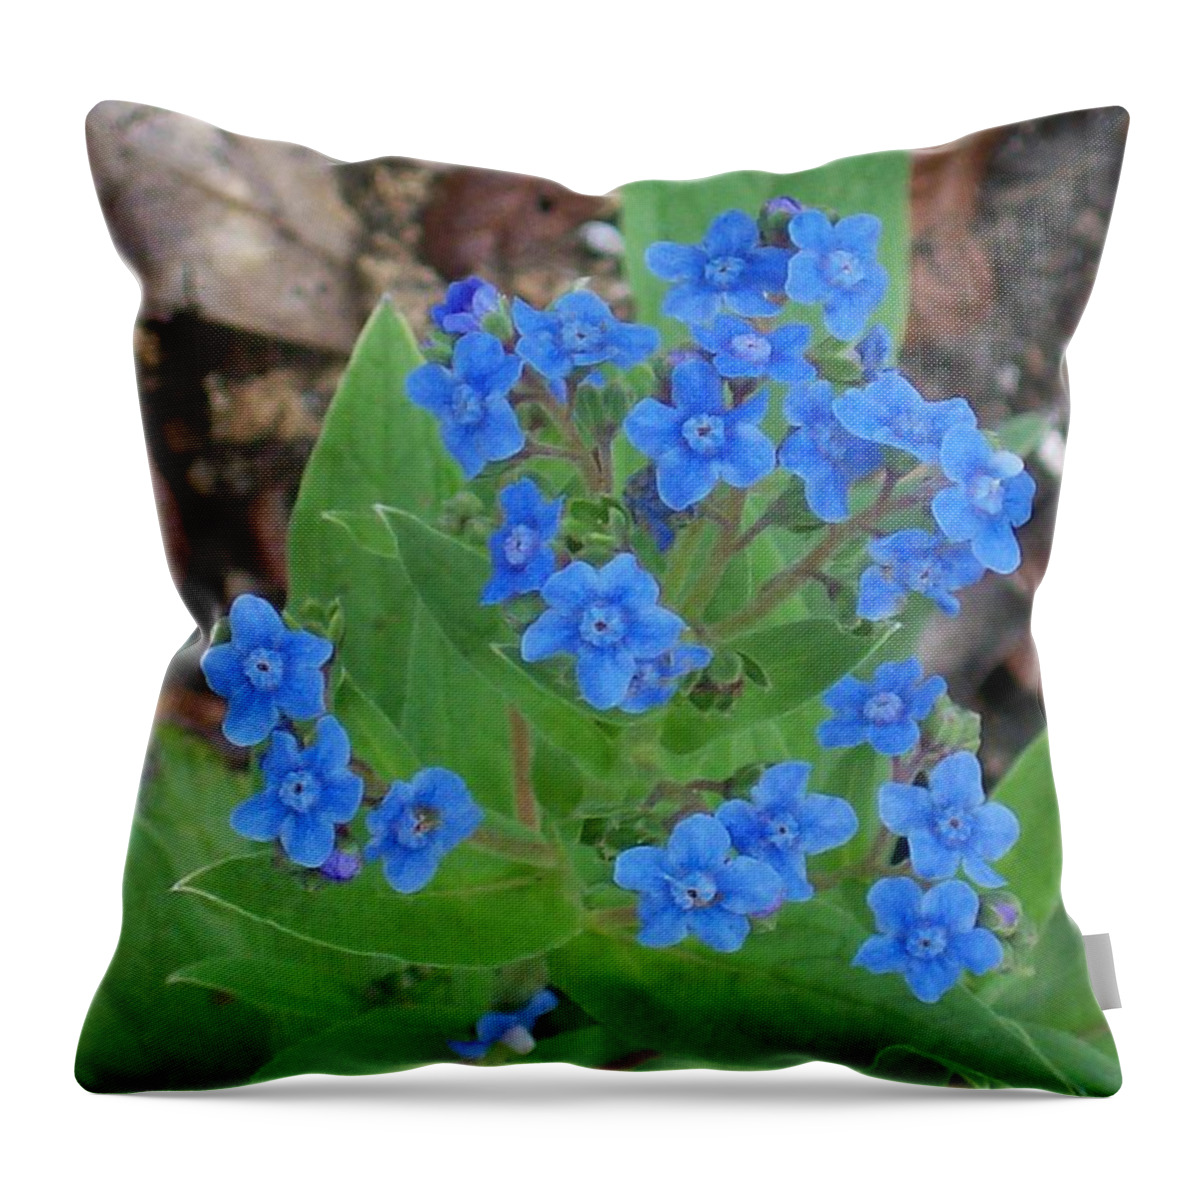 Blue Lambs Ear Flower Caught In Full Bloom. Throw Pillow featuring the photograph Blue Lambs Ear by Belinda Lee